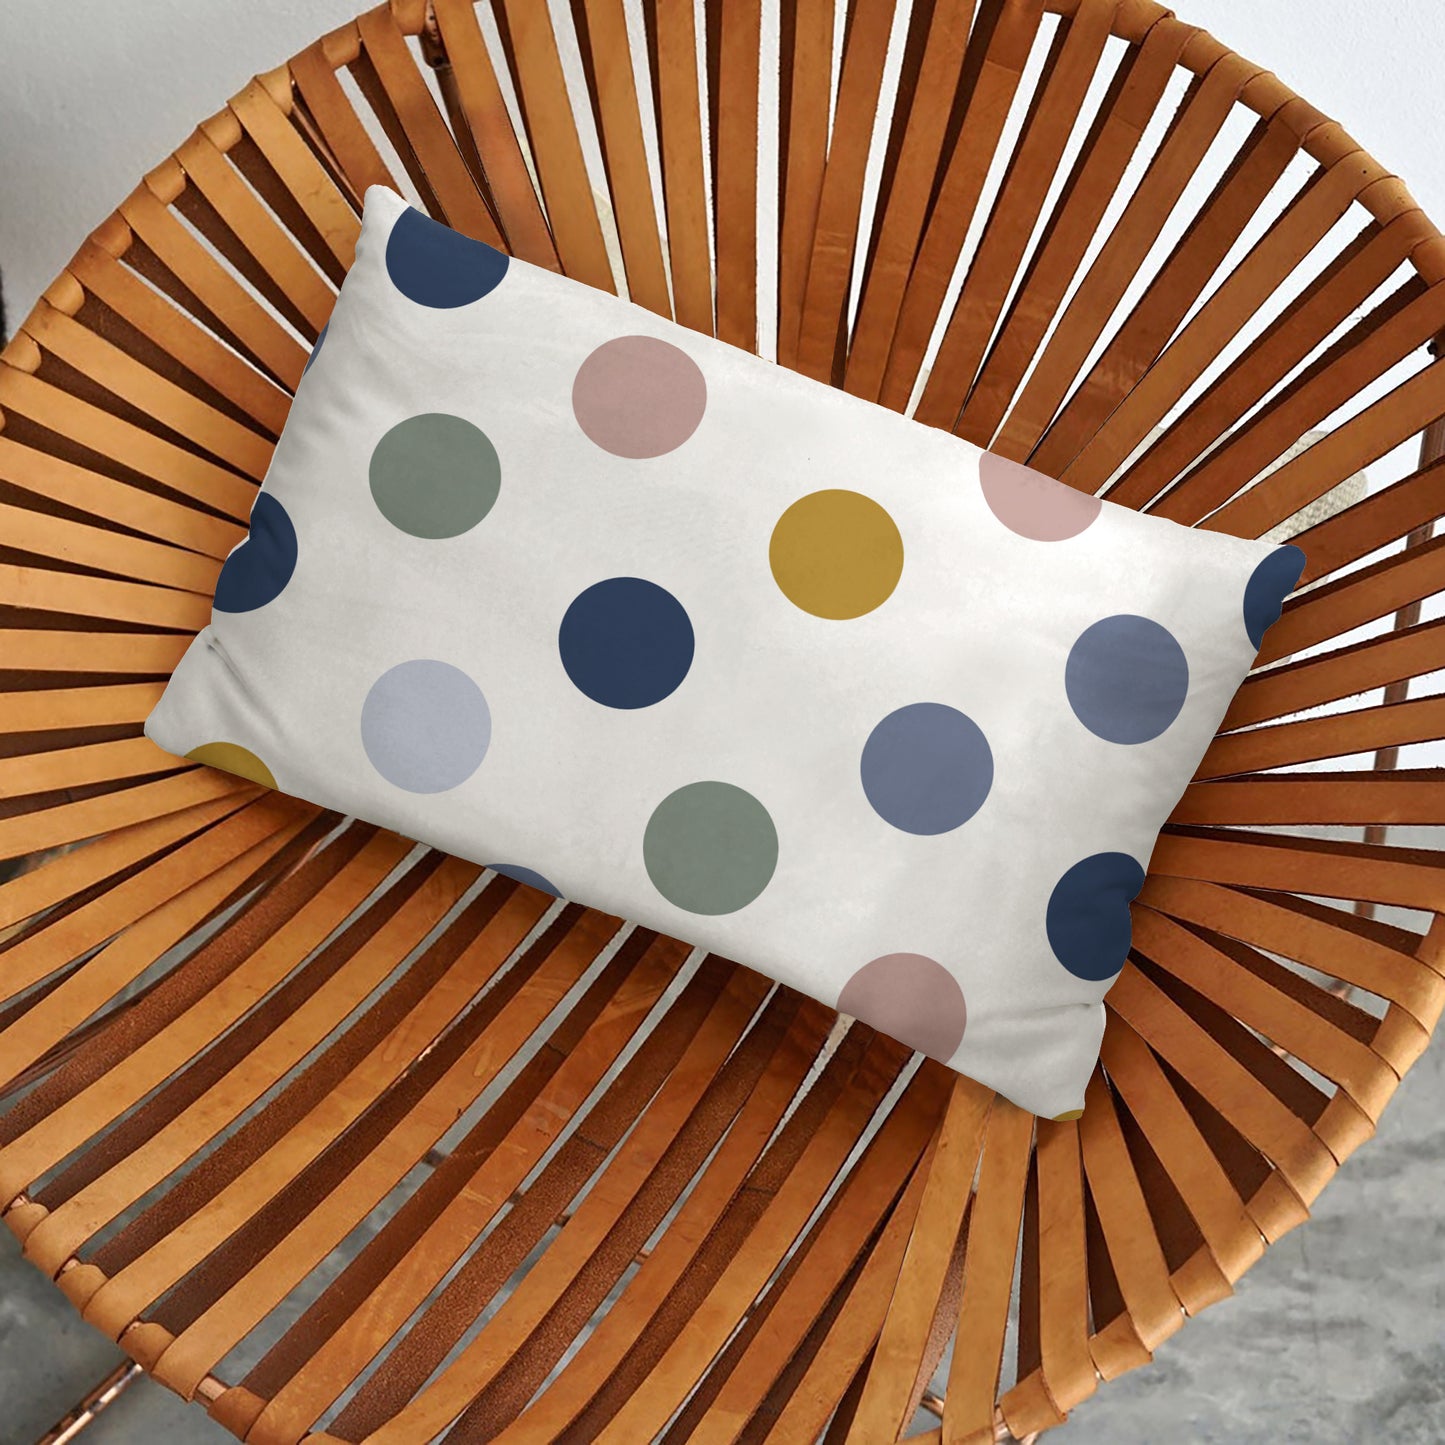 Indoor and outdoor stain-resistant cushion with stain-resistant filling 0120-160 30x50 cm